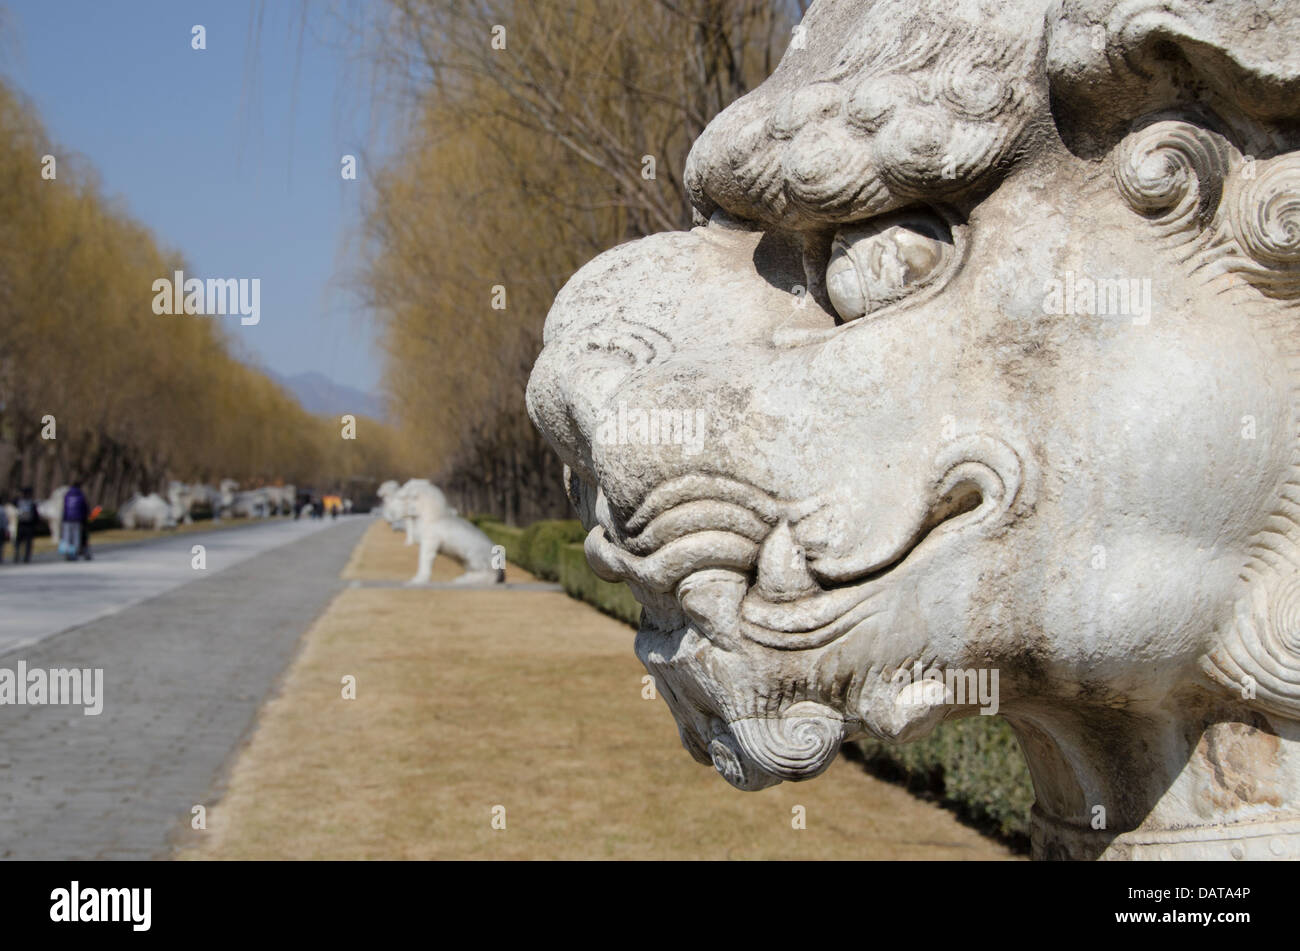 China, Beijing. Changling Sacred Way. 14th century Ming Dynasty, ornate carved statues of mythical lion creature. Stock Photo